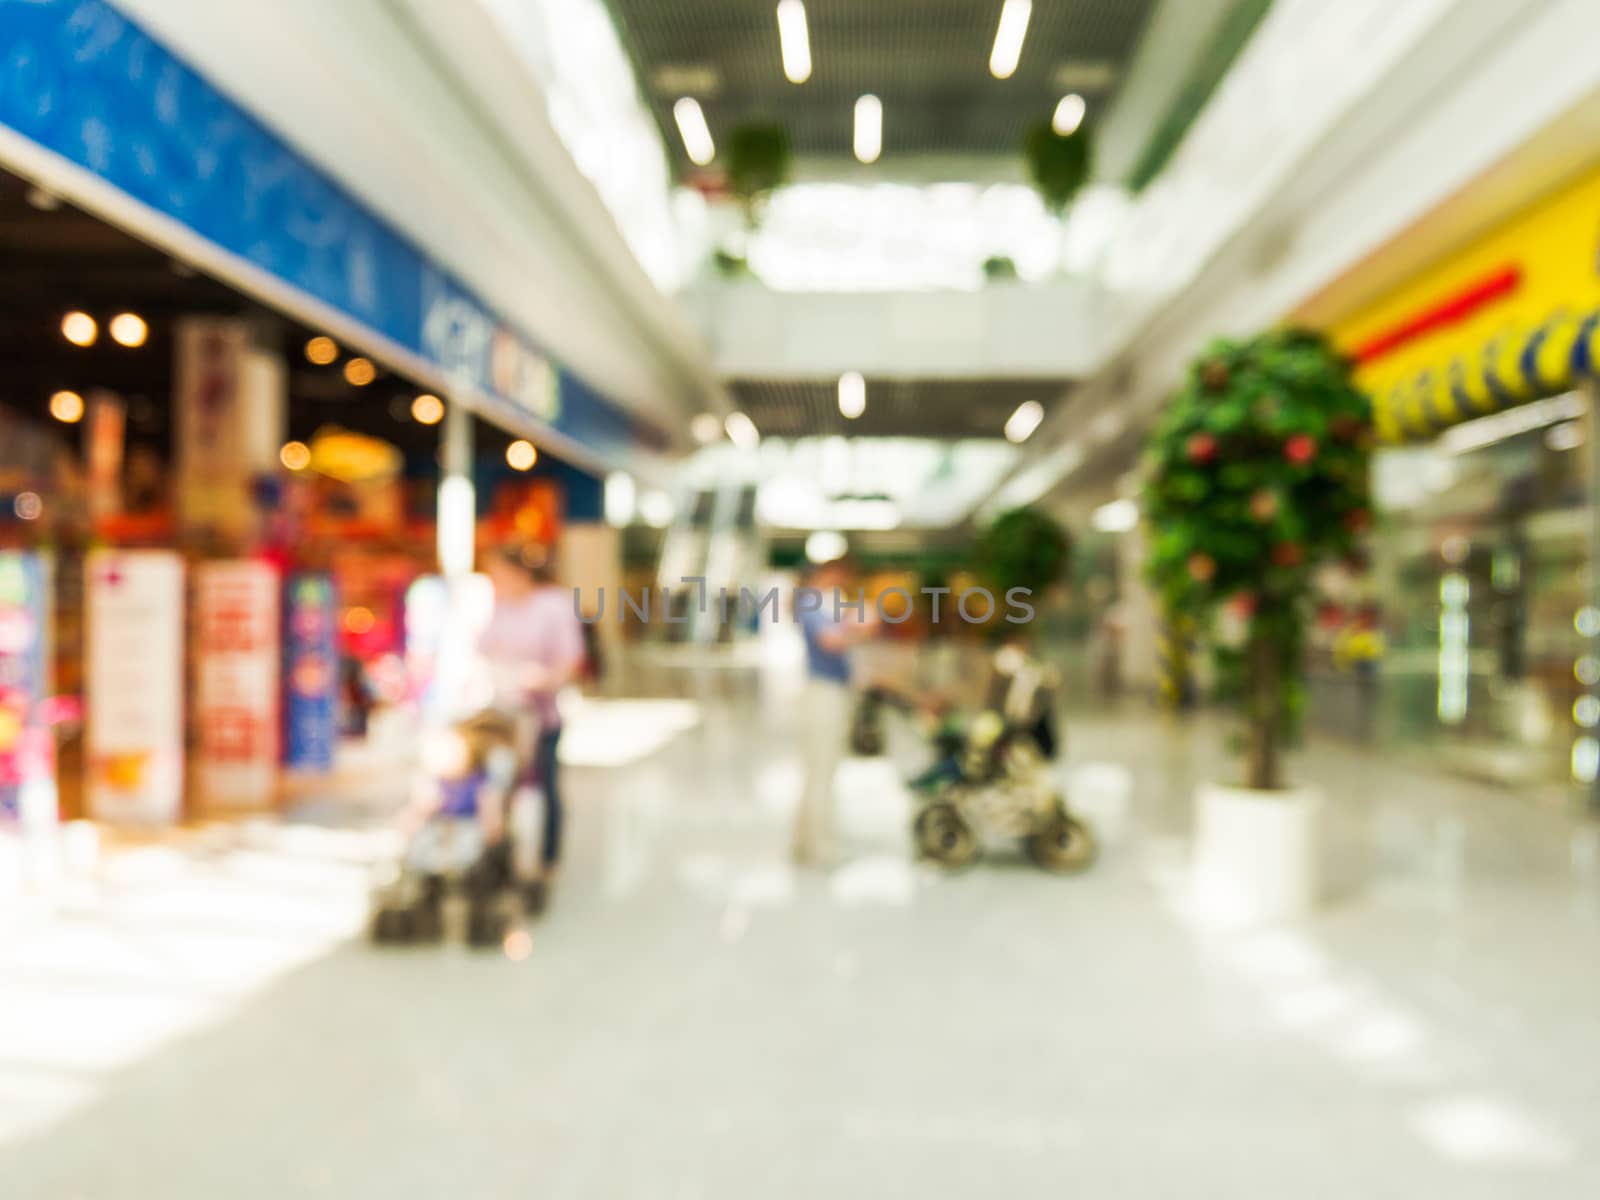 Abstract background of shopping mall with unrecognizable persons with stroller, shallow depth of focus.